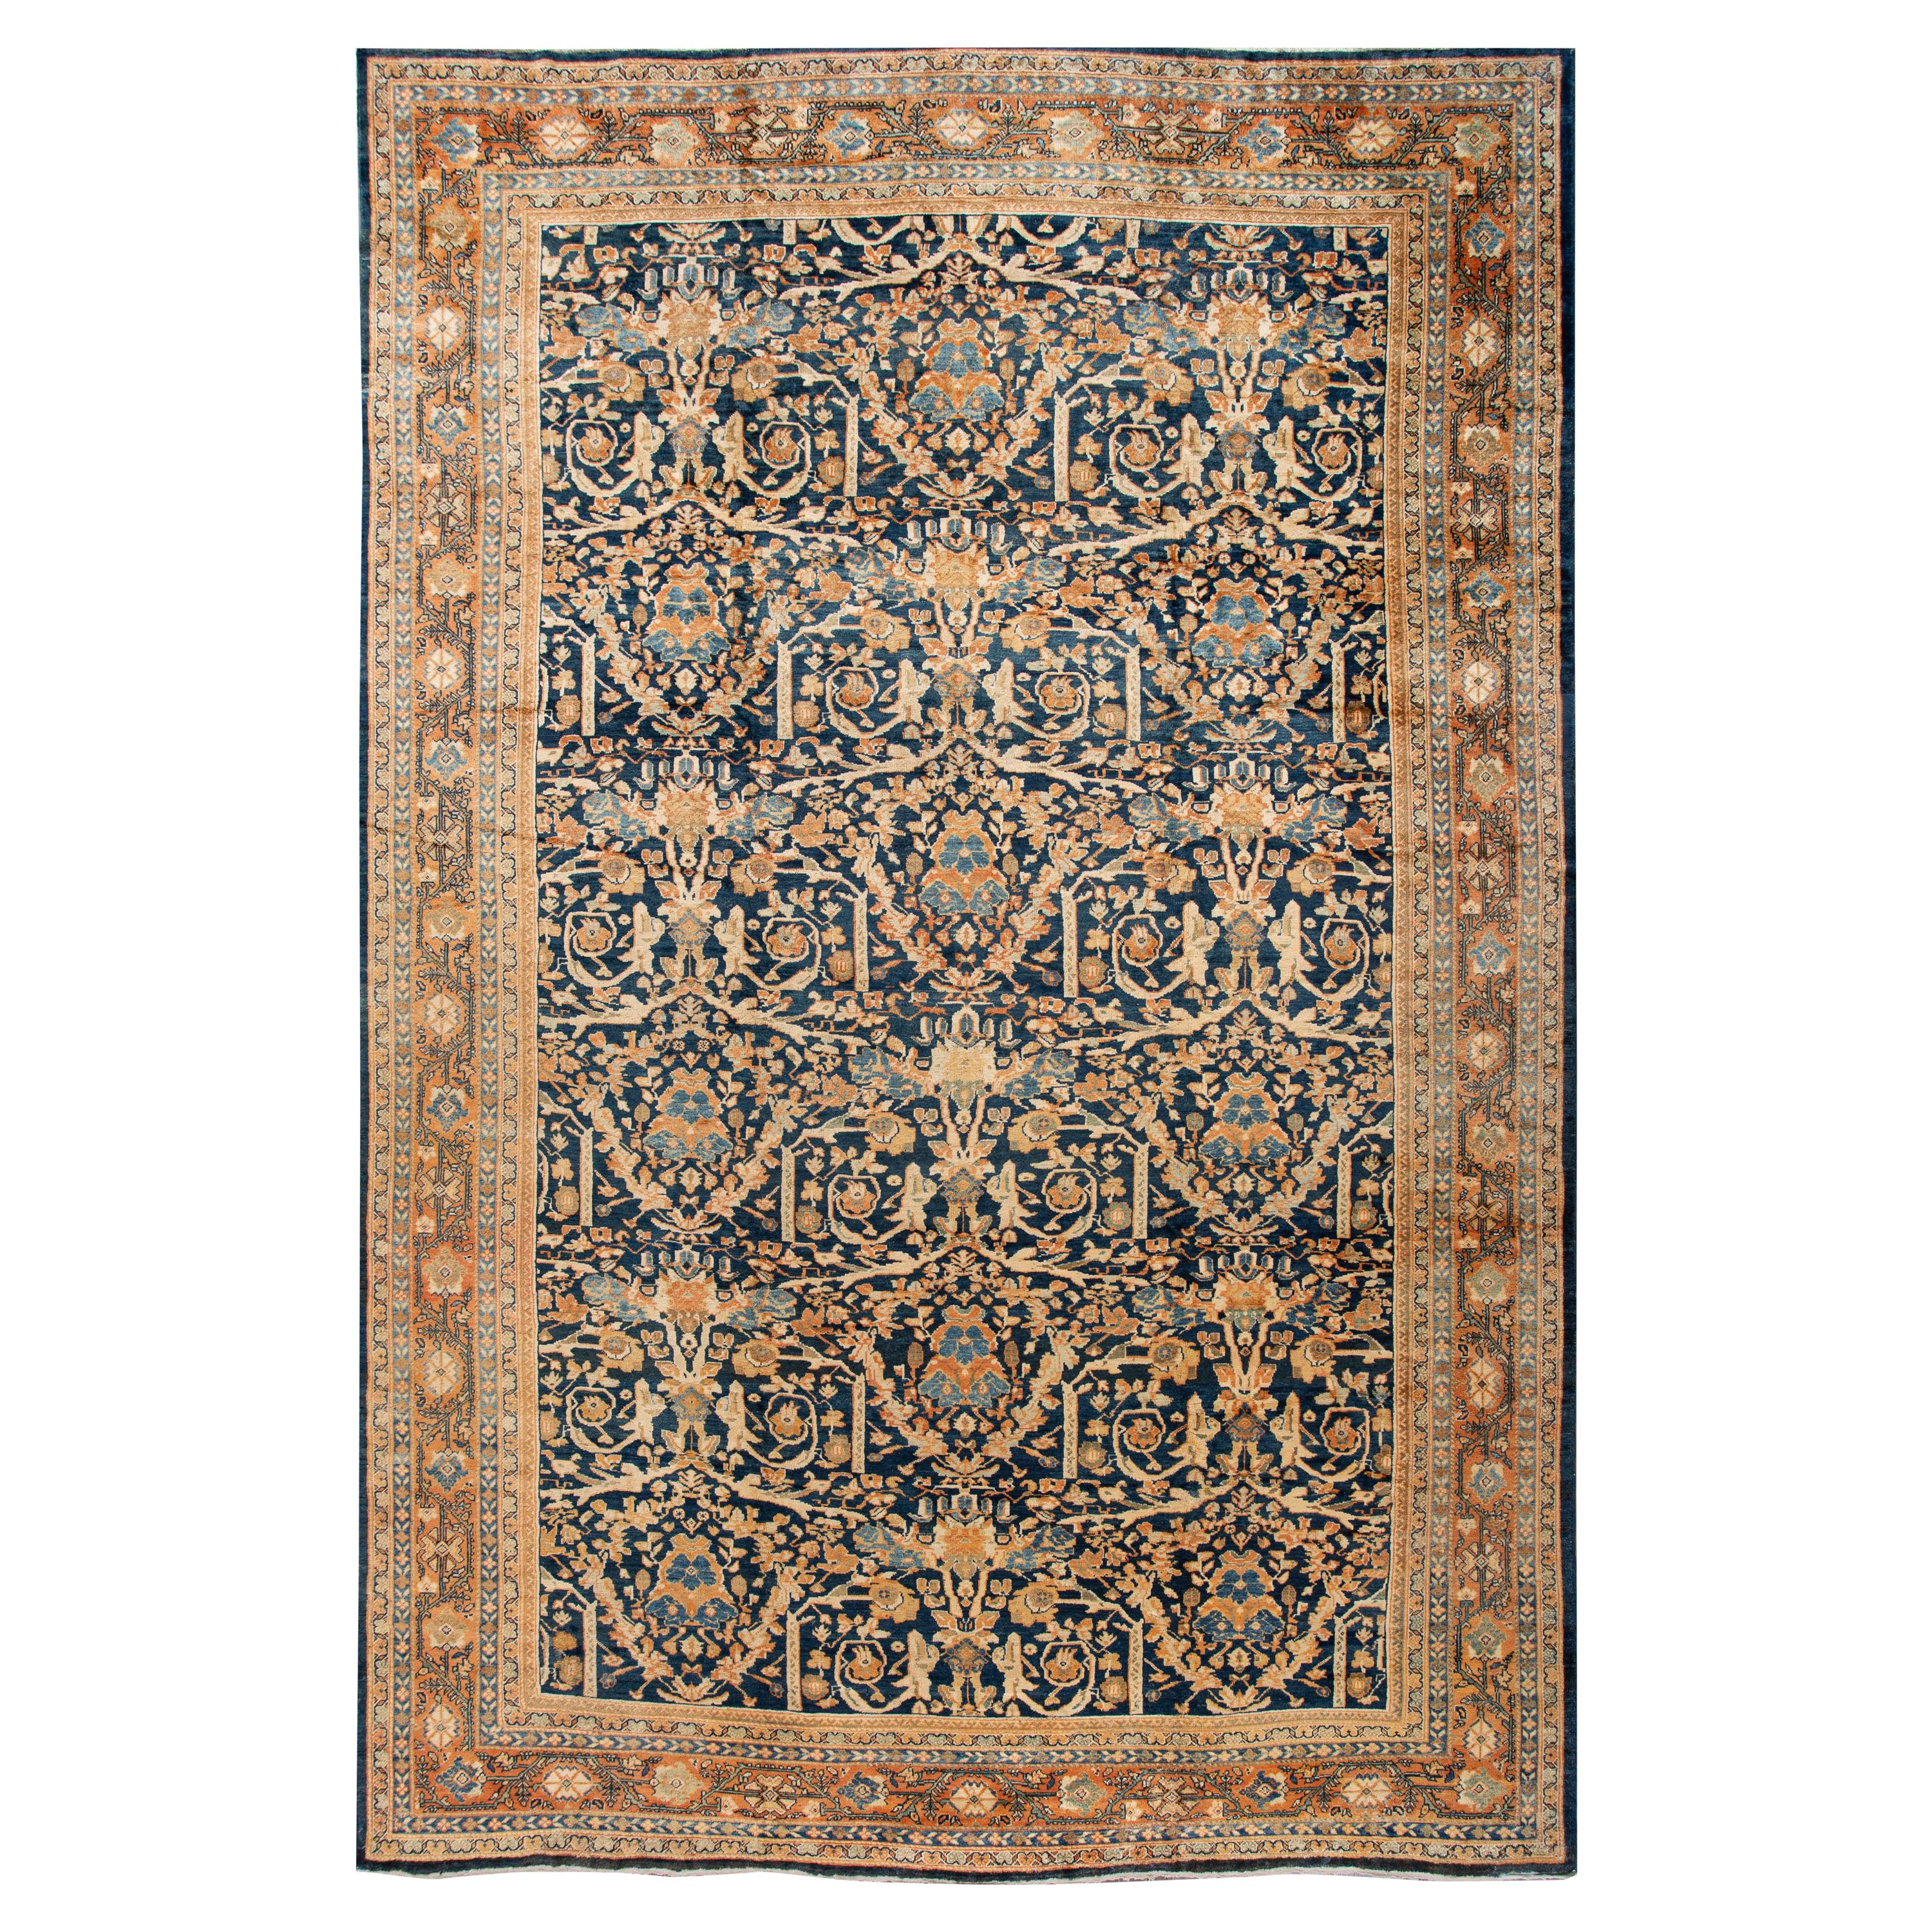 Oversize Antique Persian Mahal Blue Handmade Allover Floral Wool Rug For Sale